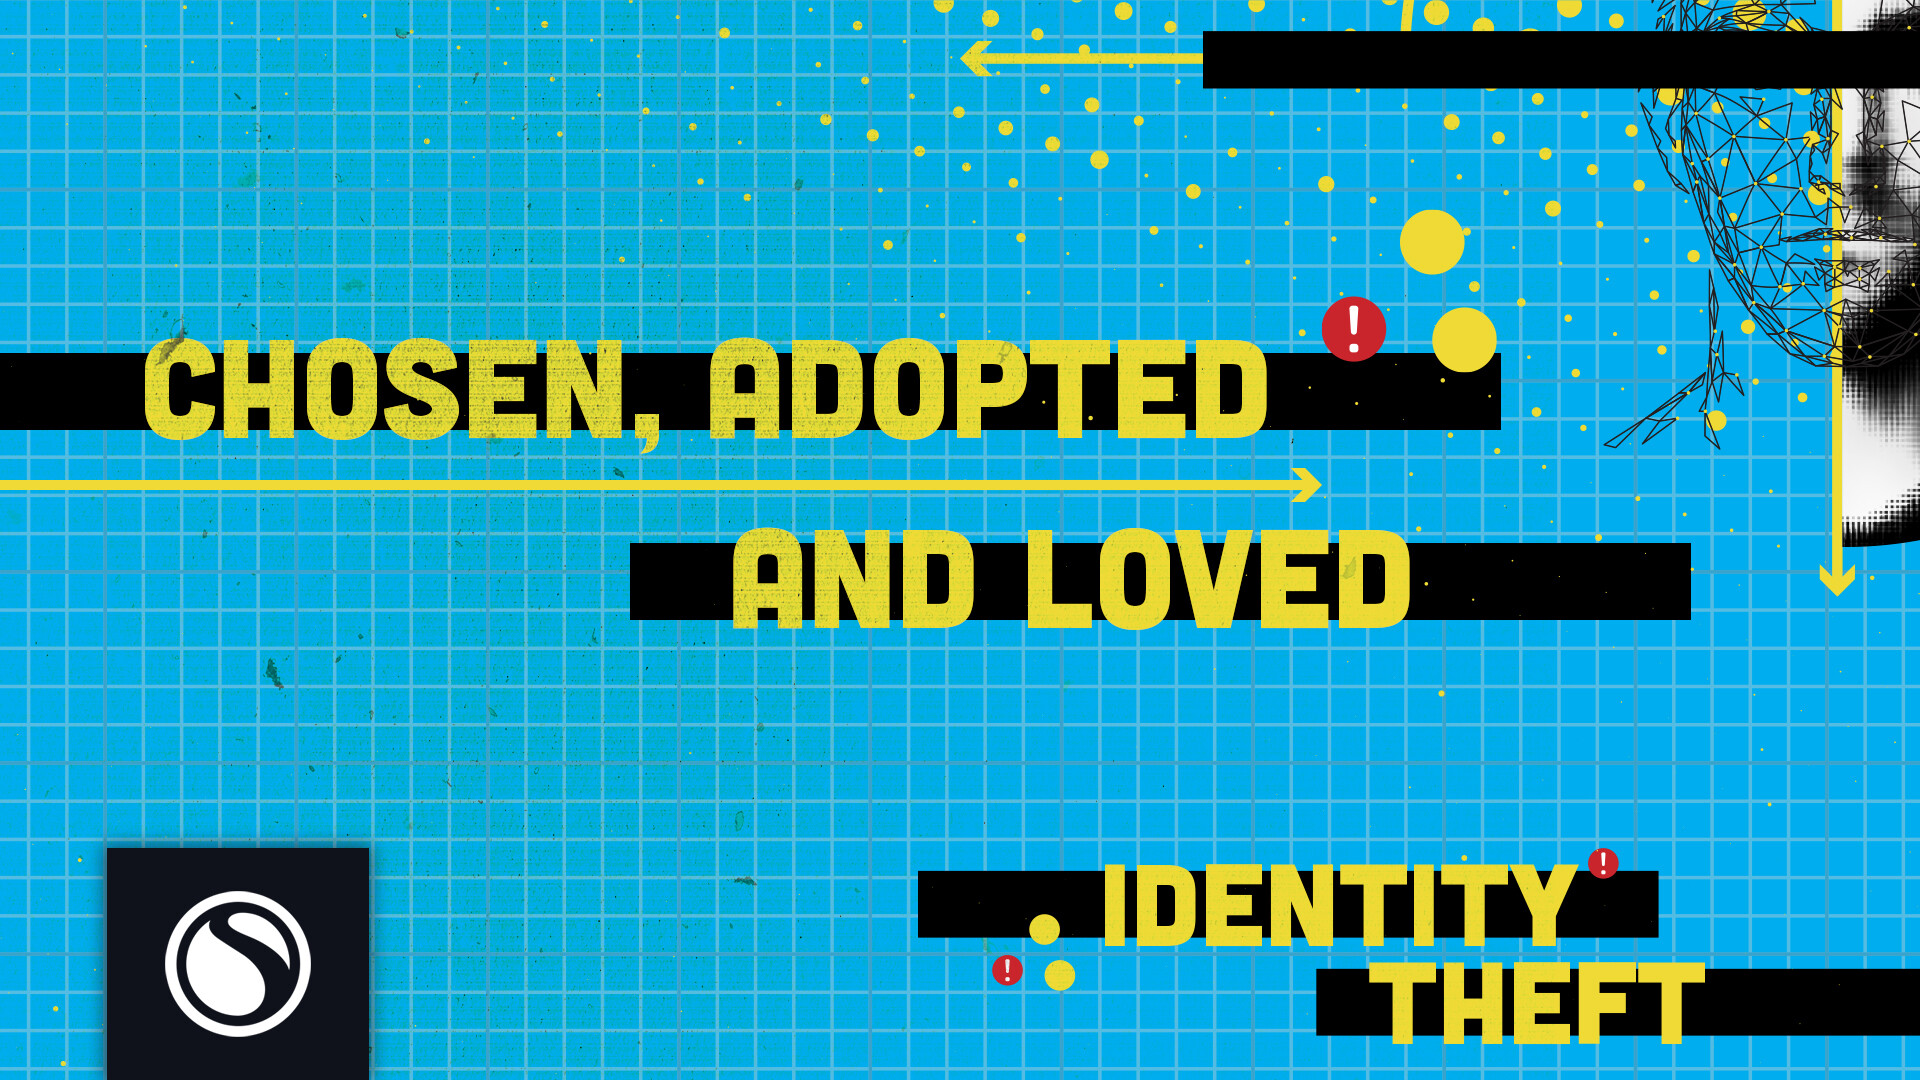 Watch Identity Theft - Chosen, Adopted and Loved